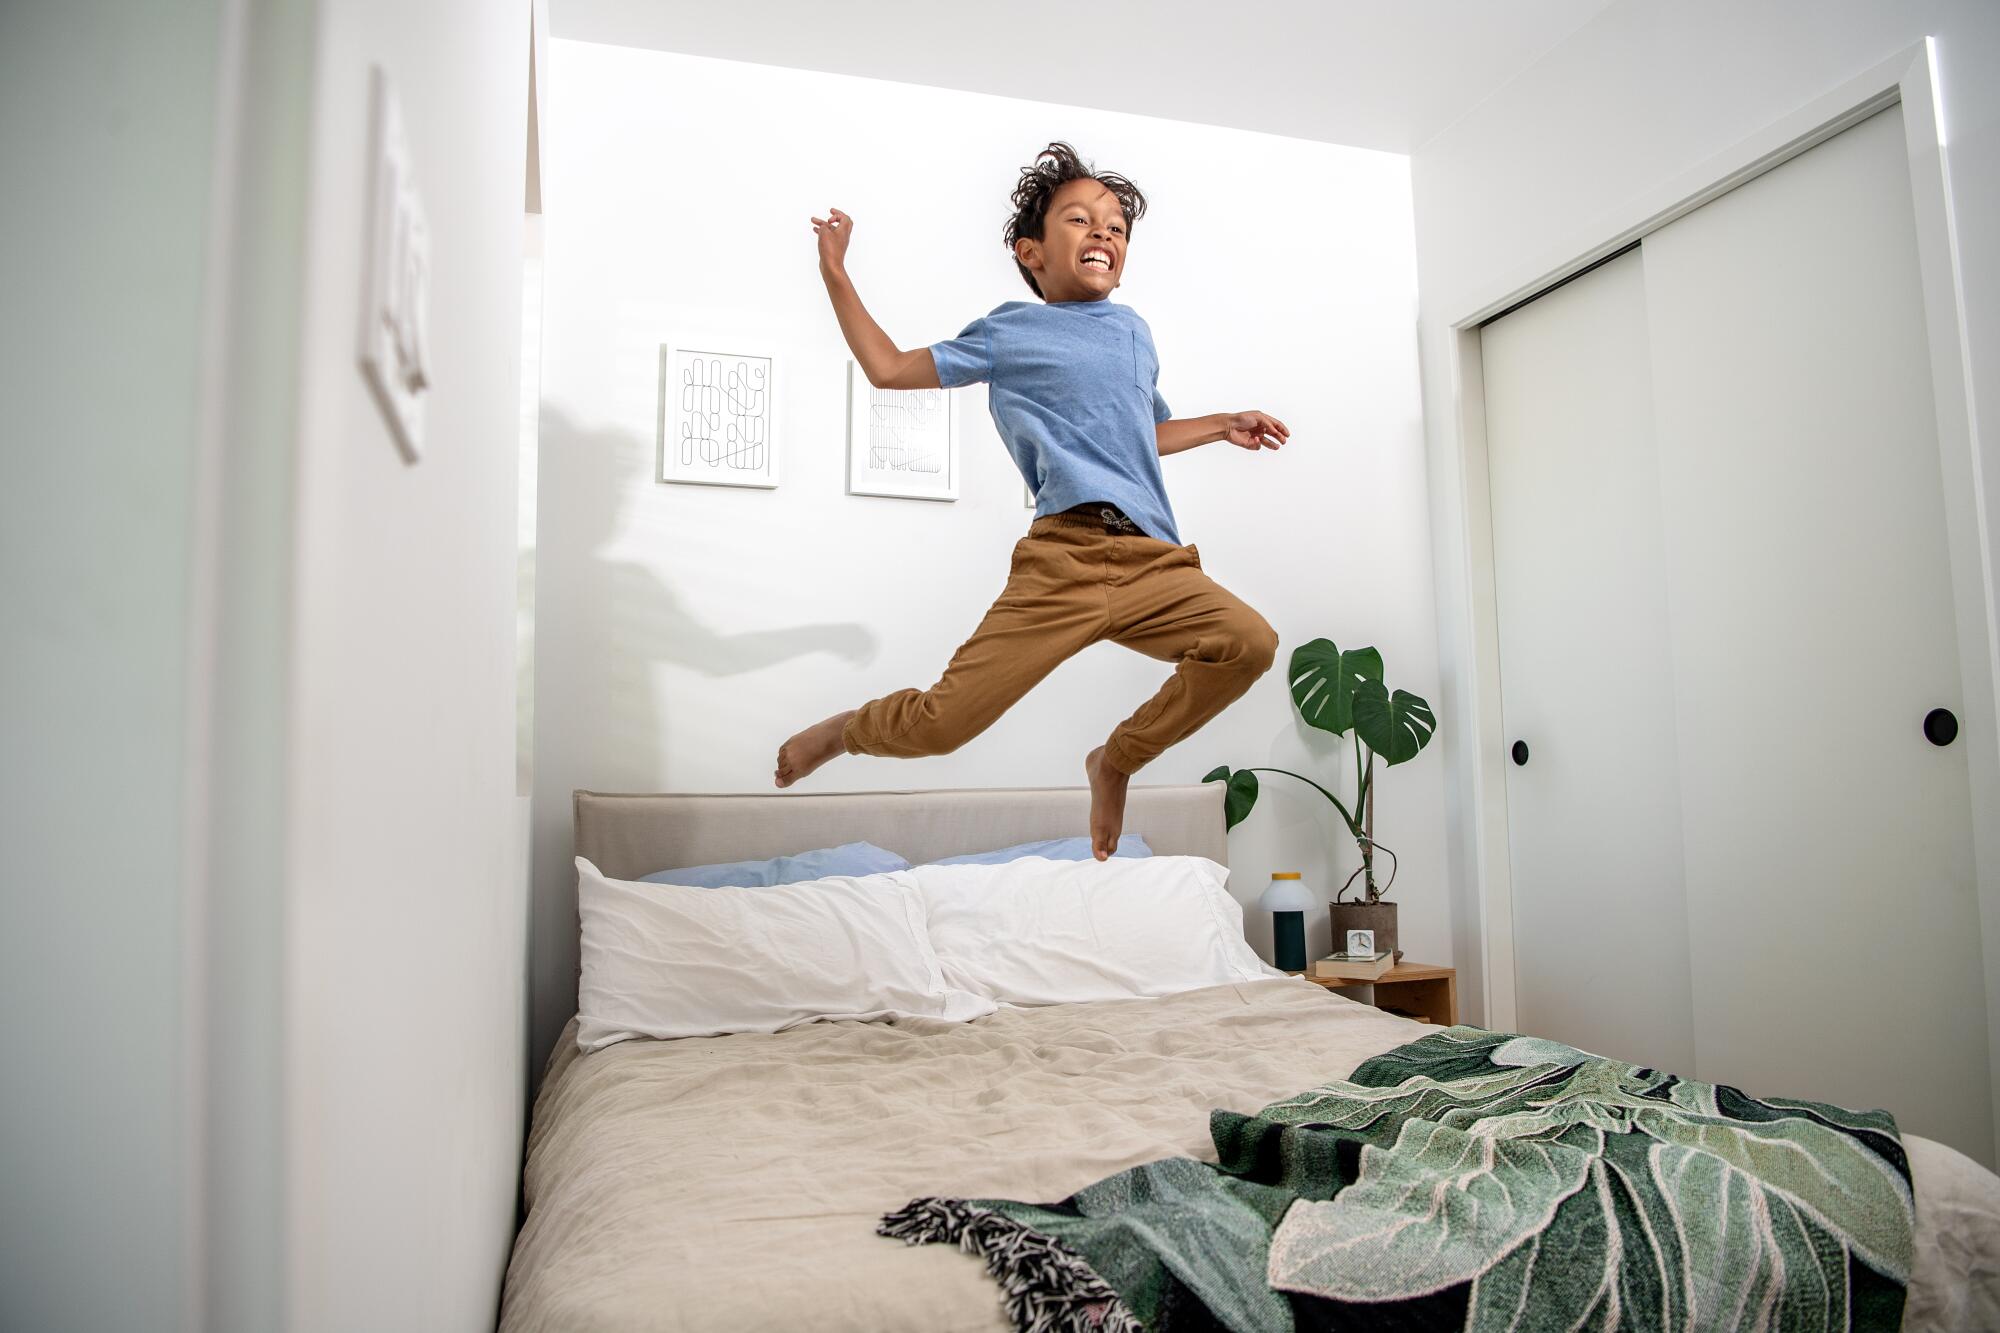 A 7-year-old boy jumps on a bed in a narrow, white-walled room